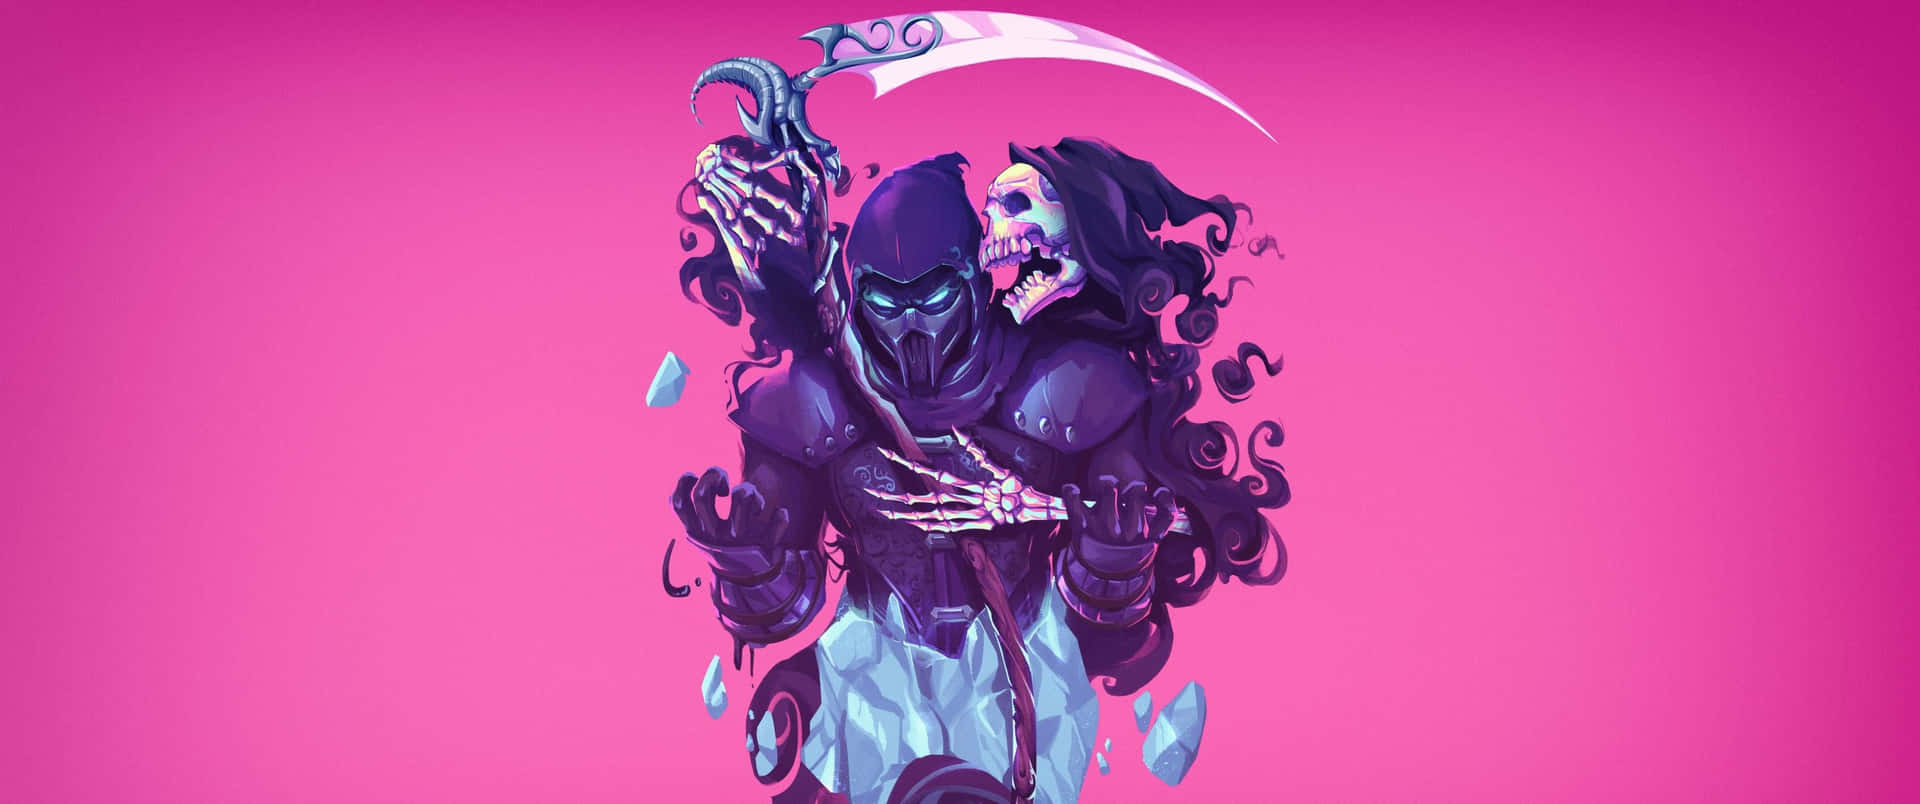 A Girl With A Scythe And A Skeleton On A Pink Background